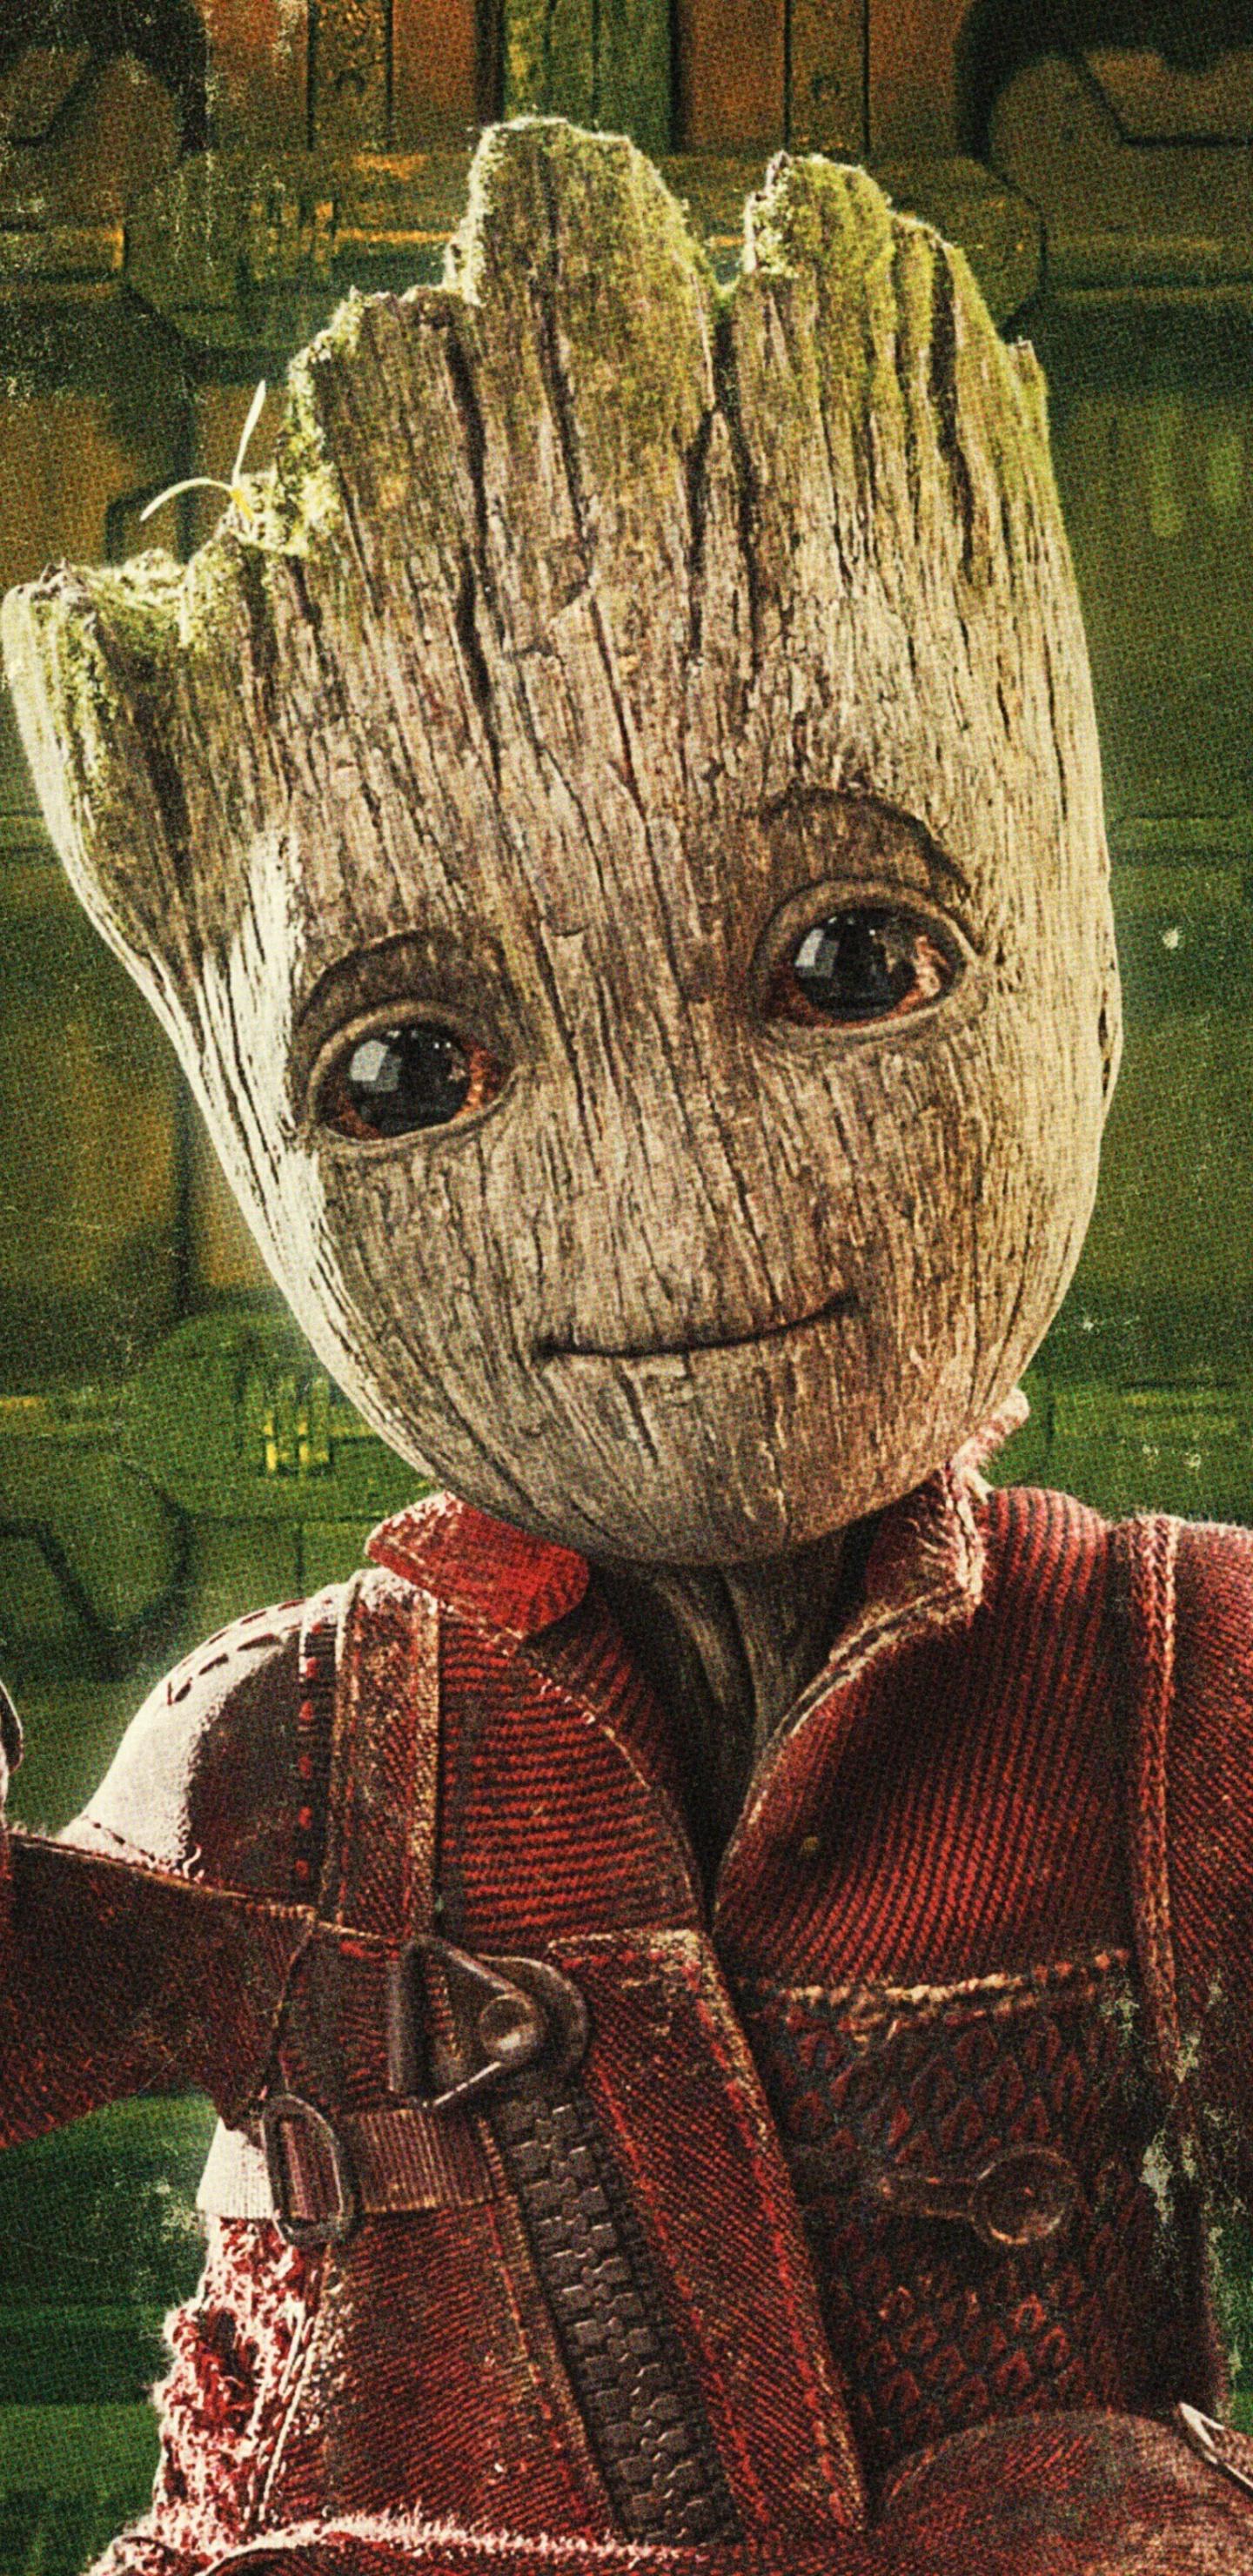 Download 1440x2960 wallpaper baby groot, guardians of the galaxy vol. movie, samsung galaxy s samsung galaxy s8 plus, 1440x2960 HD image, background, 4576